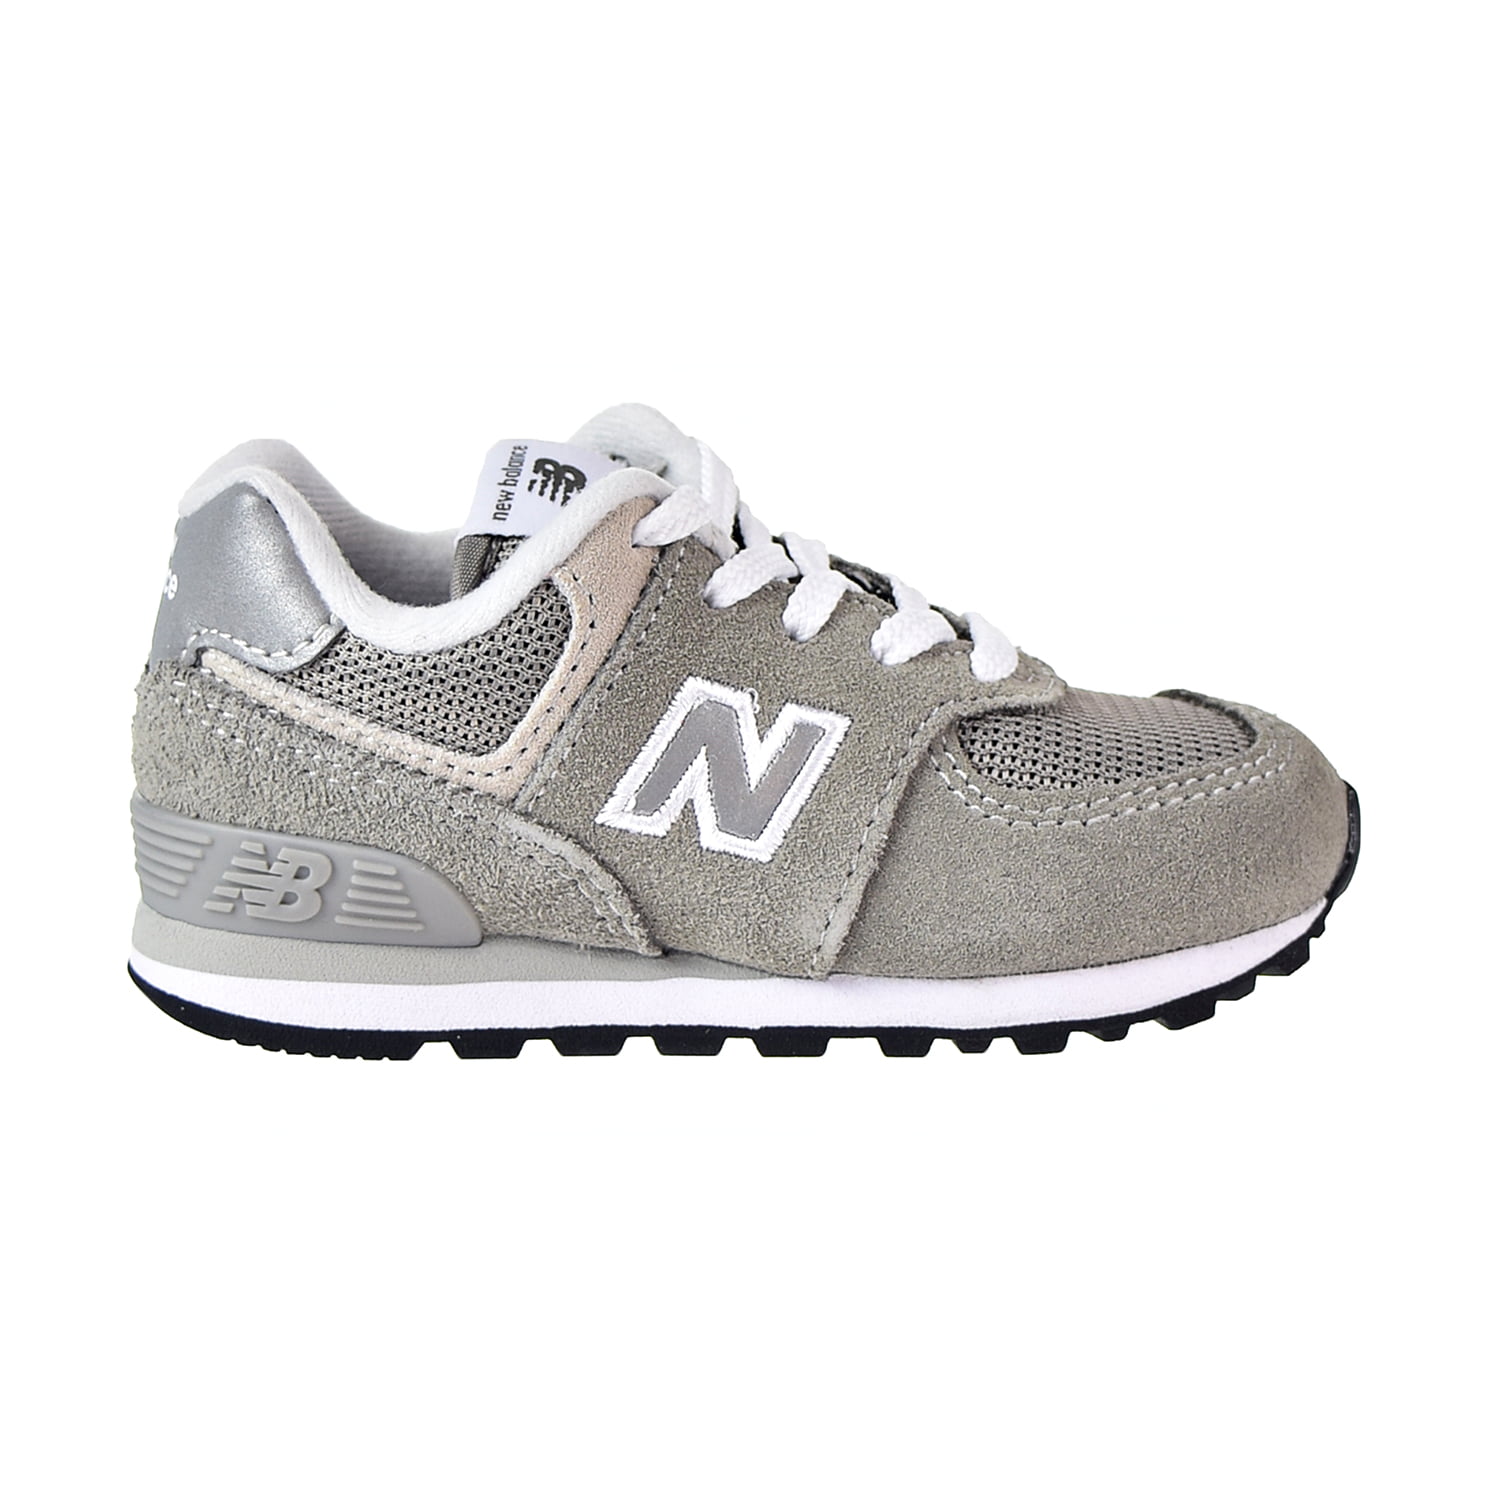 new balance 574 toddler shoes